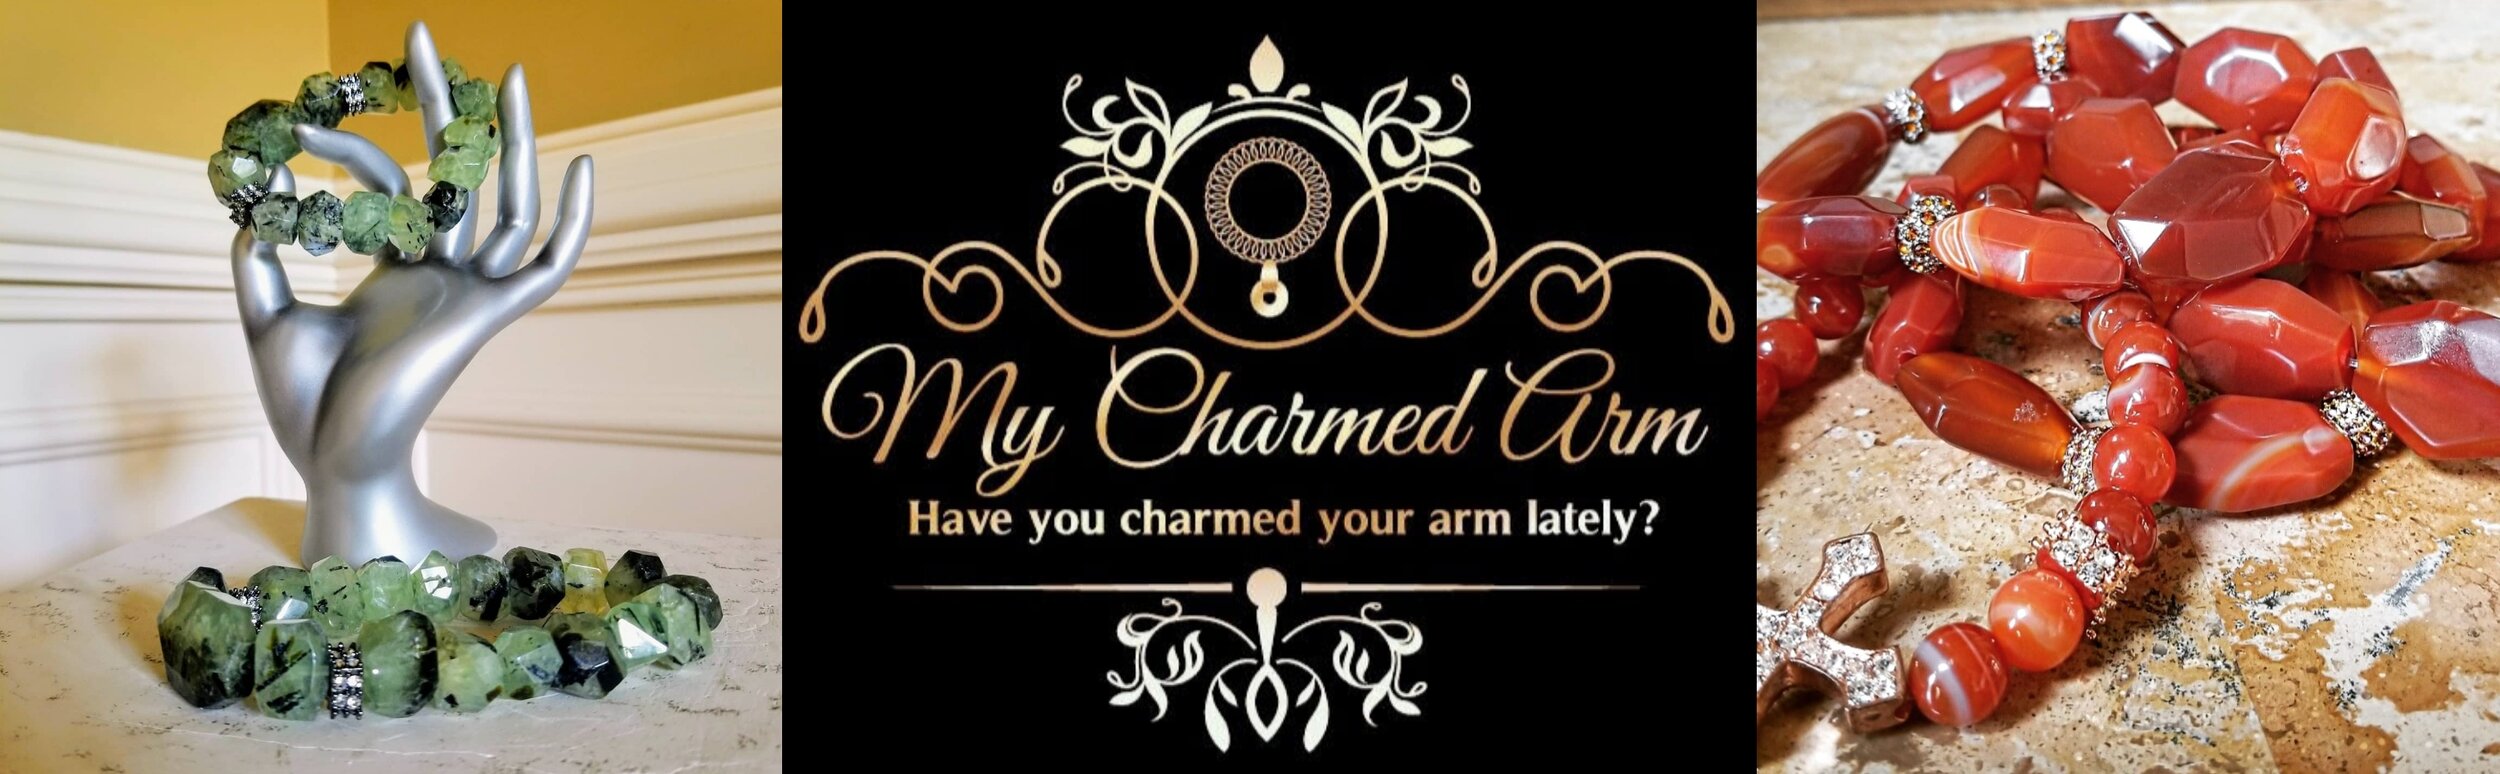 My Charmed Arm Logo with Designs.jpg